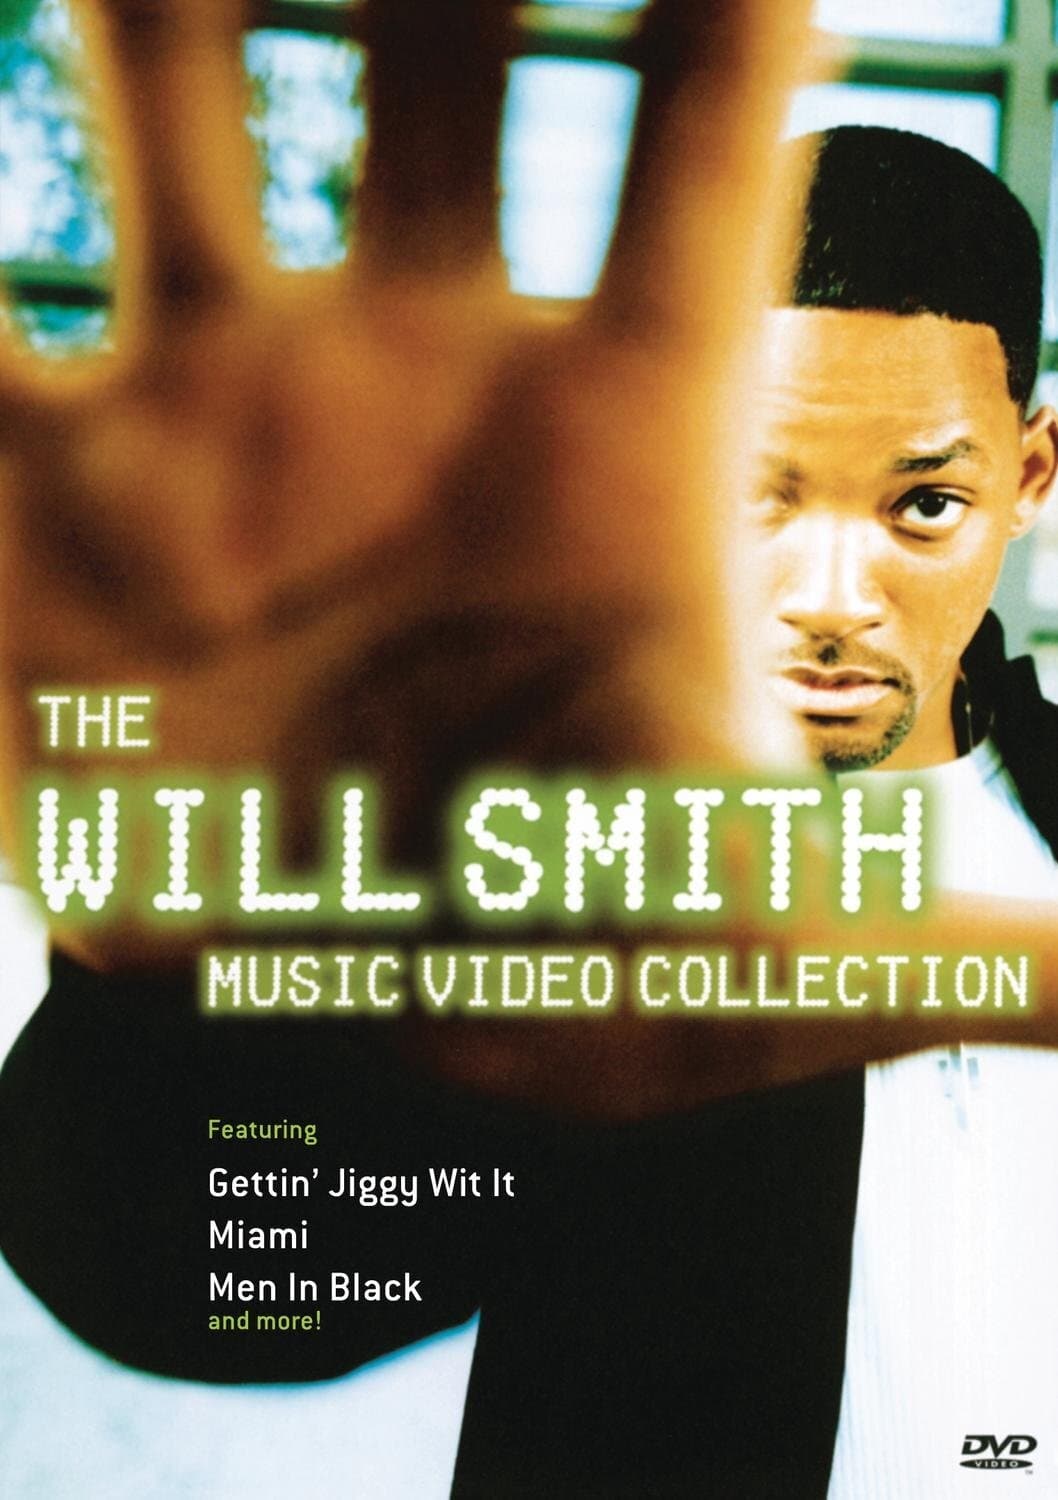 The Will Smith - Music Video Collection